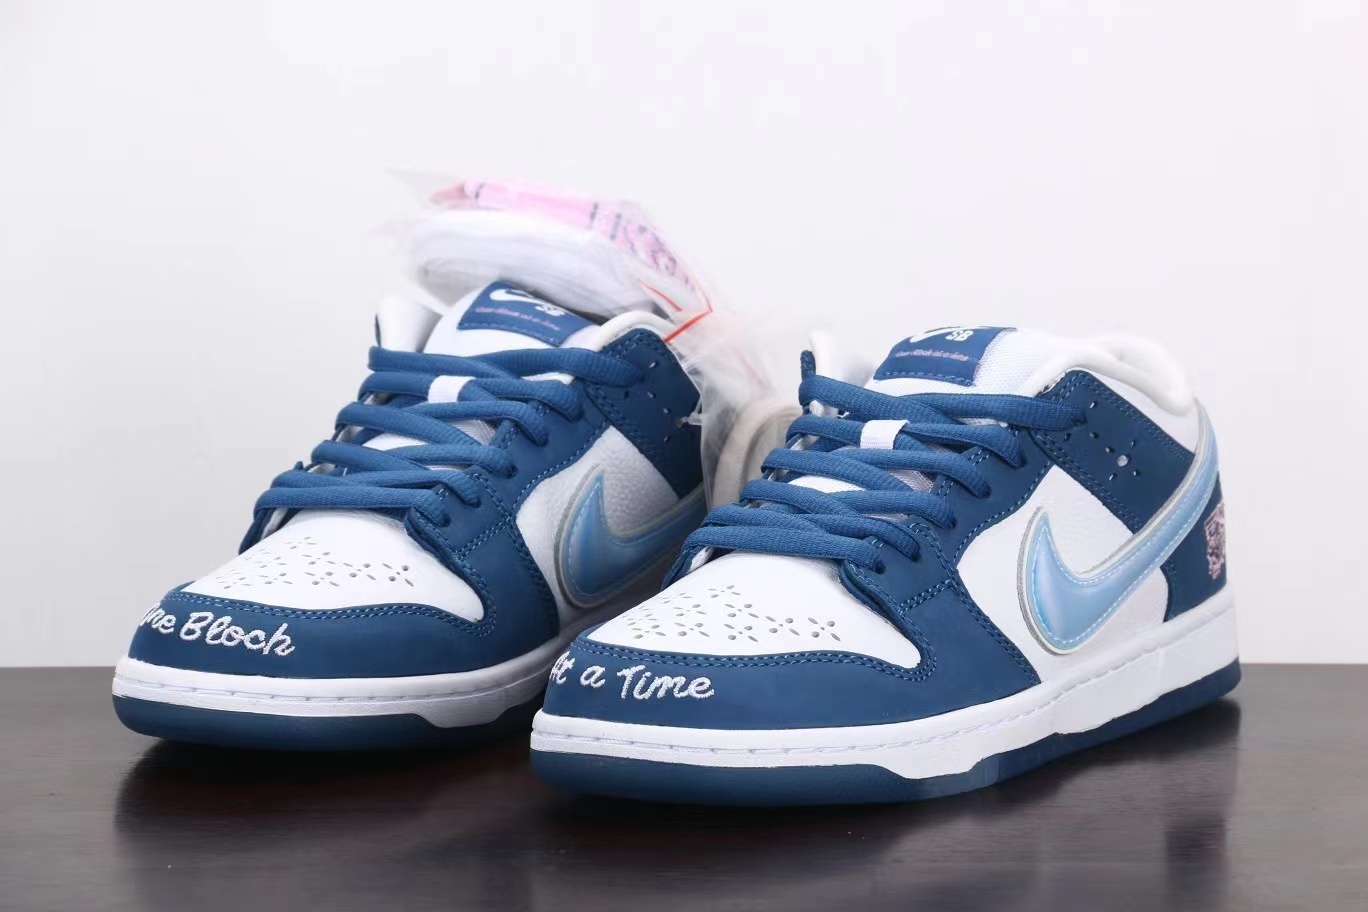 LJR SB Dunk Low Born x Raised One Block At A Time, FN7819-400